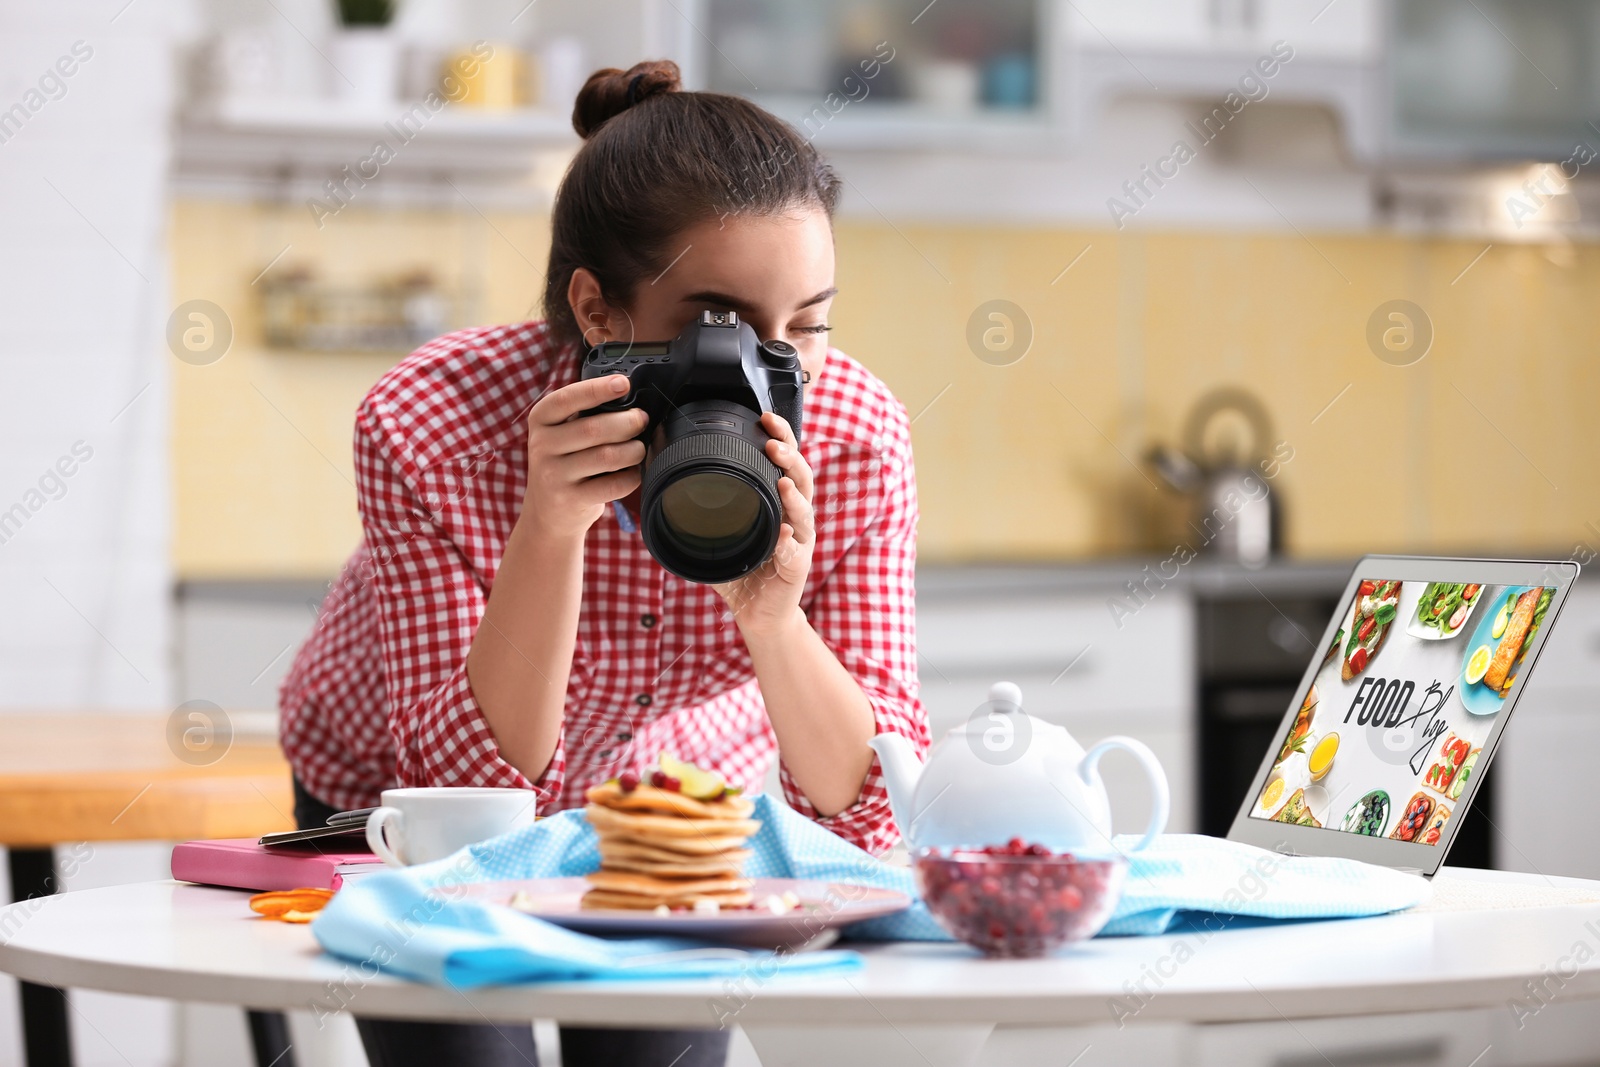 Photo of Food blogger taking photo of her breakfast at table